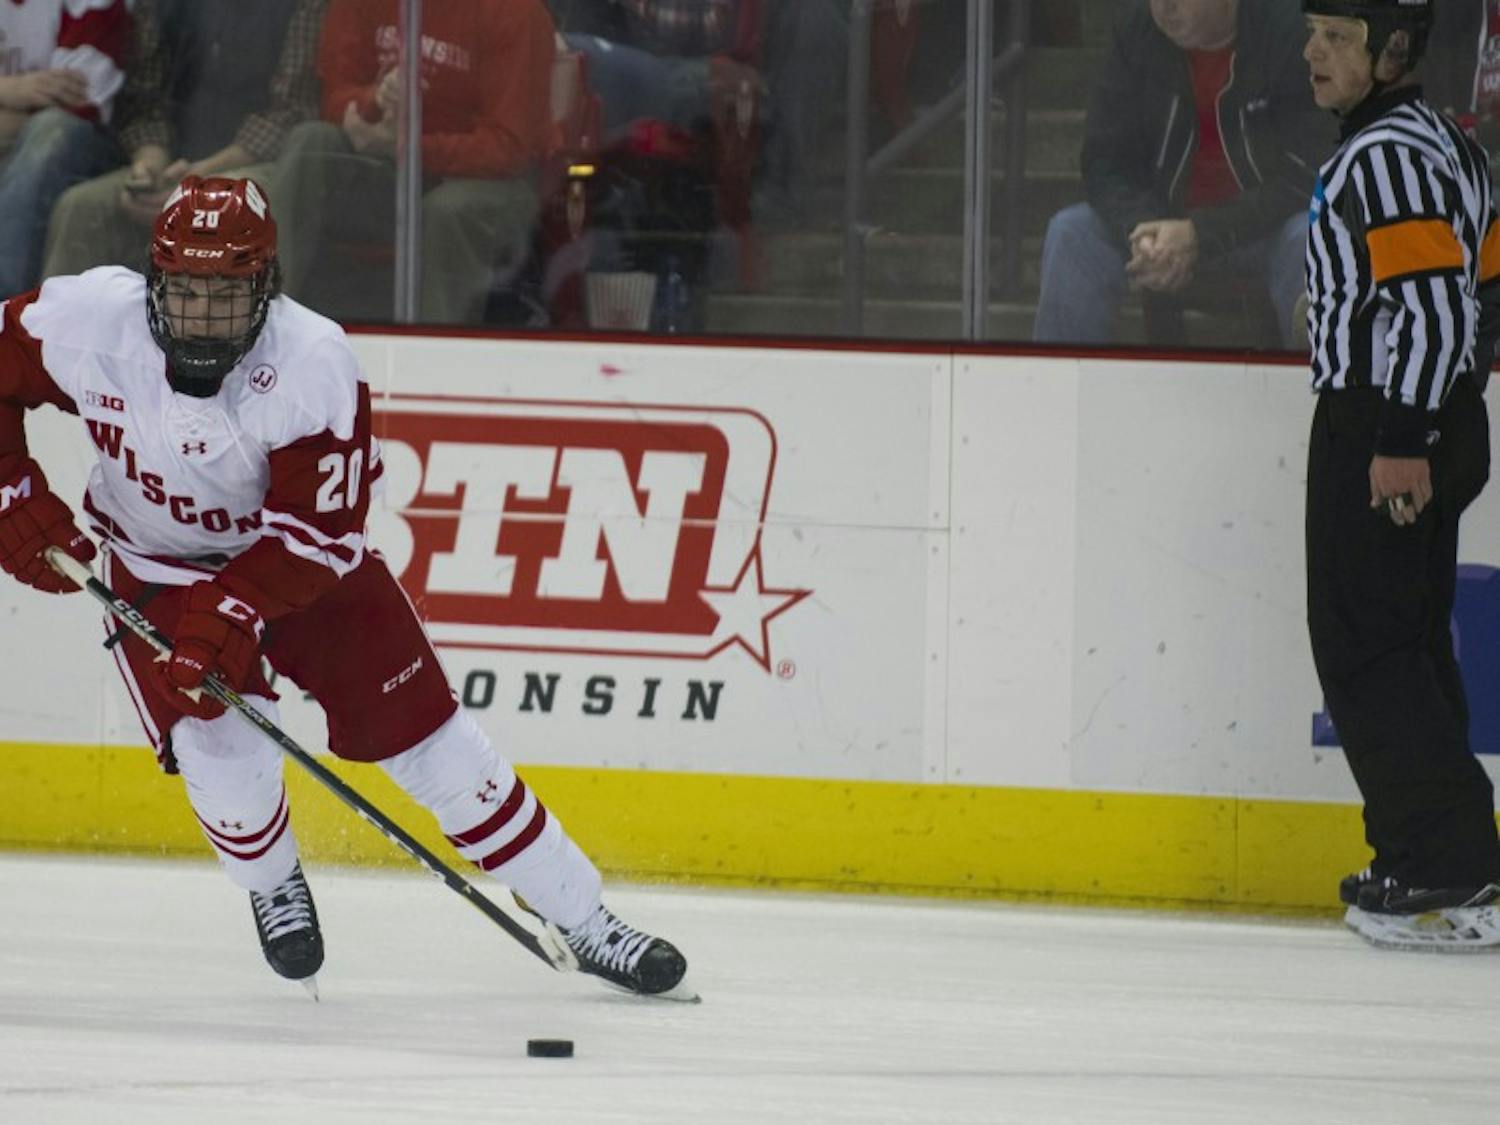 Sophomore defenseman Josh Ess scored the game-winning goal in the third period after Wisconsin's defense kept it in the game during a penalty kill.